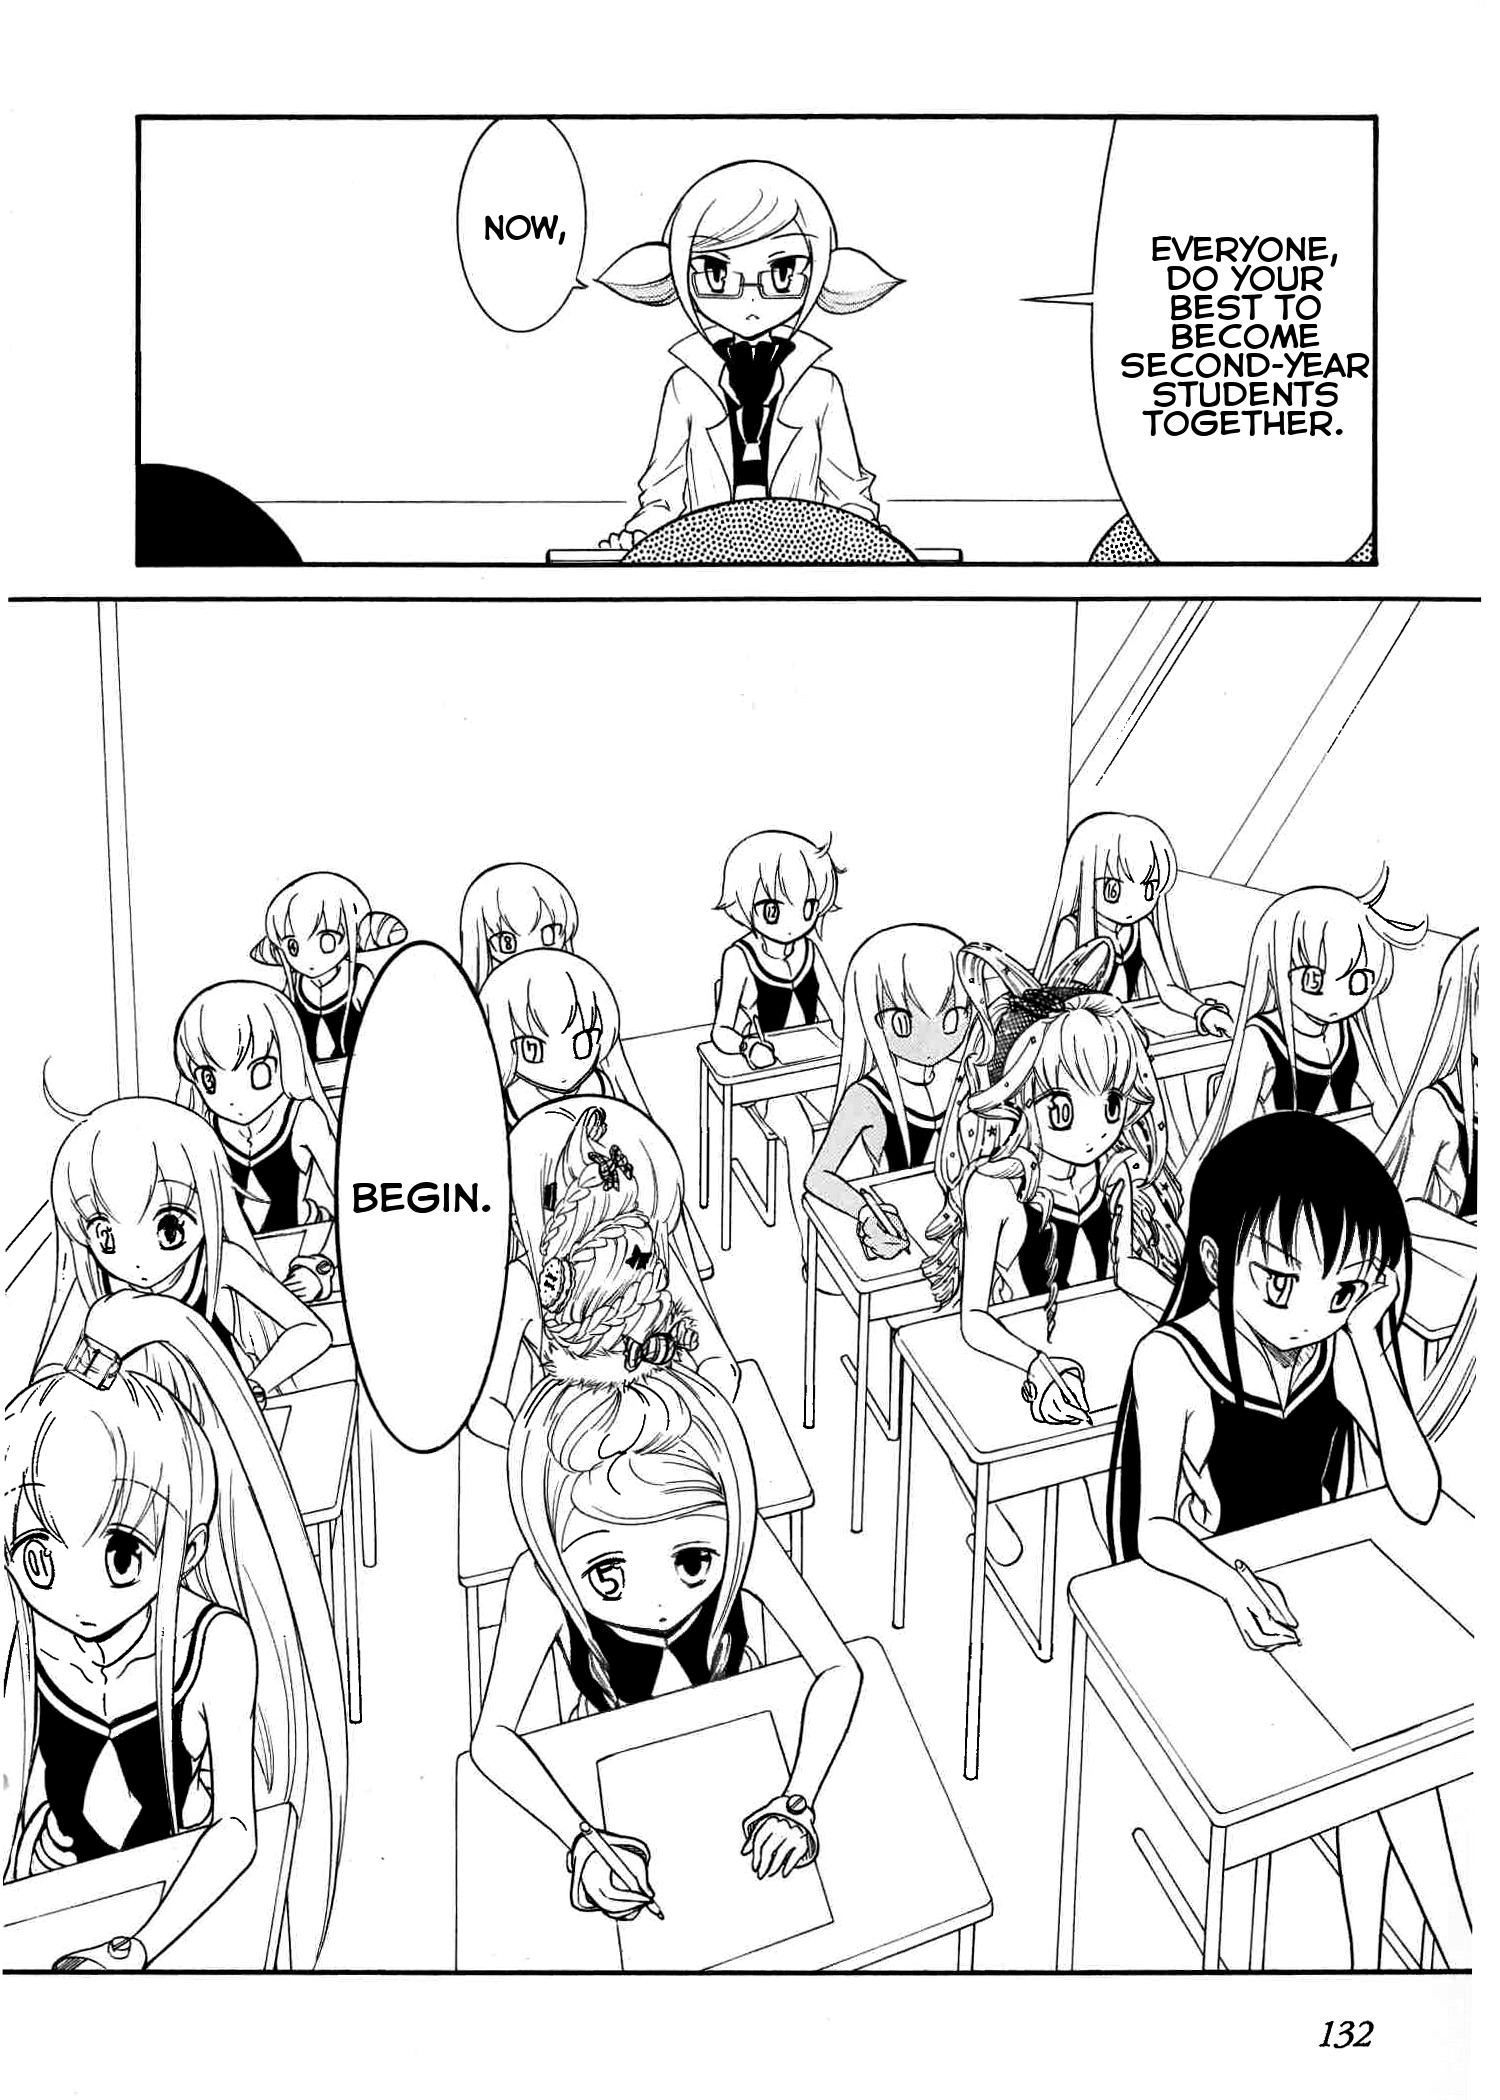 Number Girl vol.3 ch.50